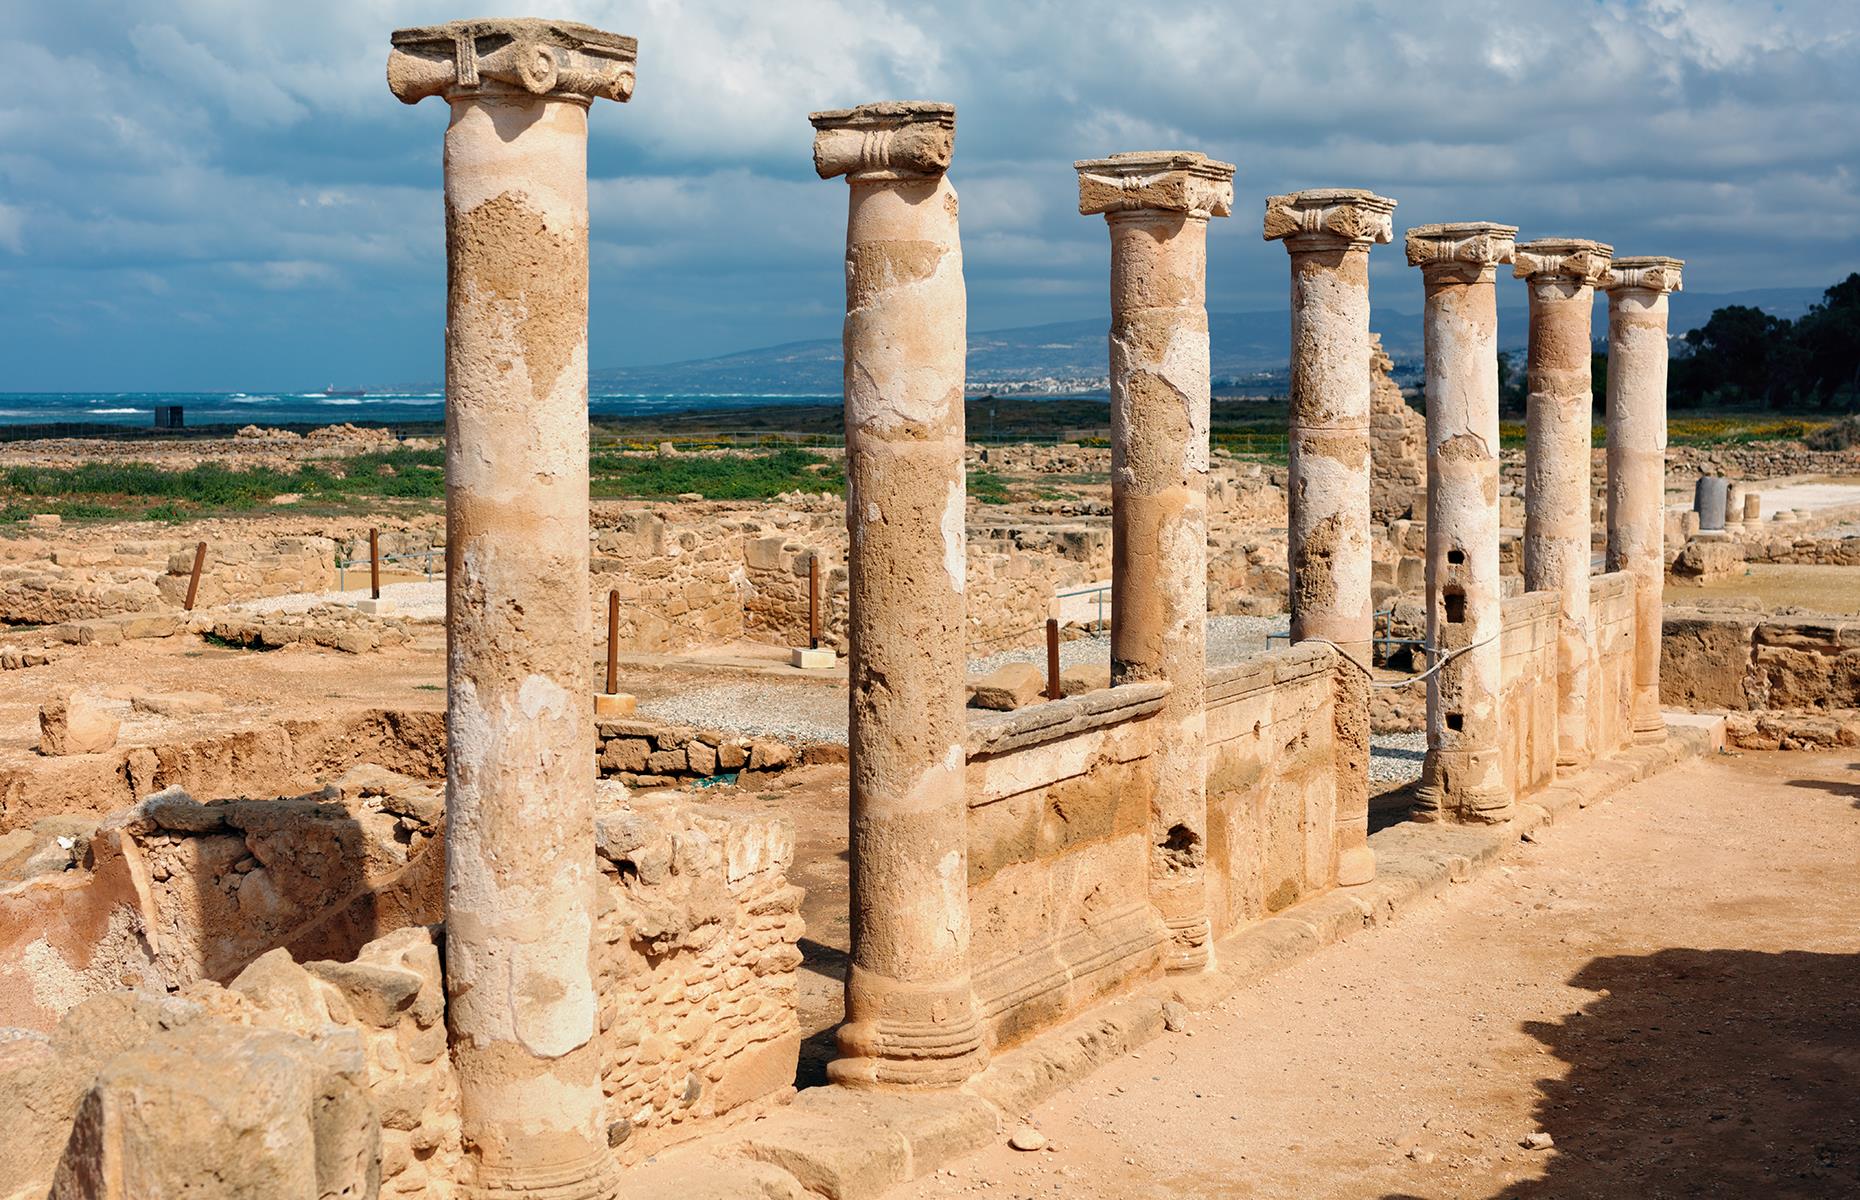 Tear yourself away from Paphos’ wonderful beaches and step into ancient history at the Kato Paphos Archaeological Park. This Unesco World Heritage Site features Greek, Roman and medieval ruins against a Mediterranean backdrop. Climb the steps of the ancient stone theatre and wander along the uncovered mosaic floors of four Roman villas.